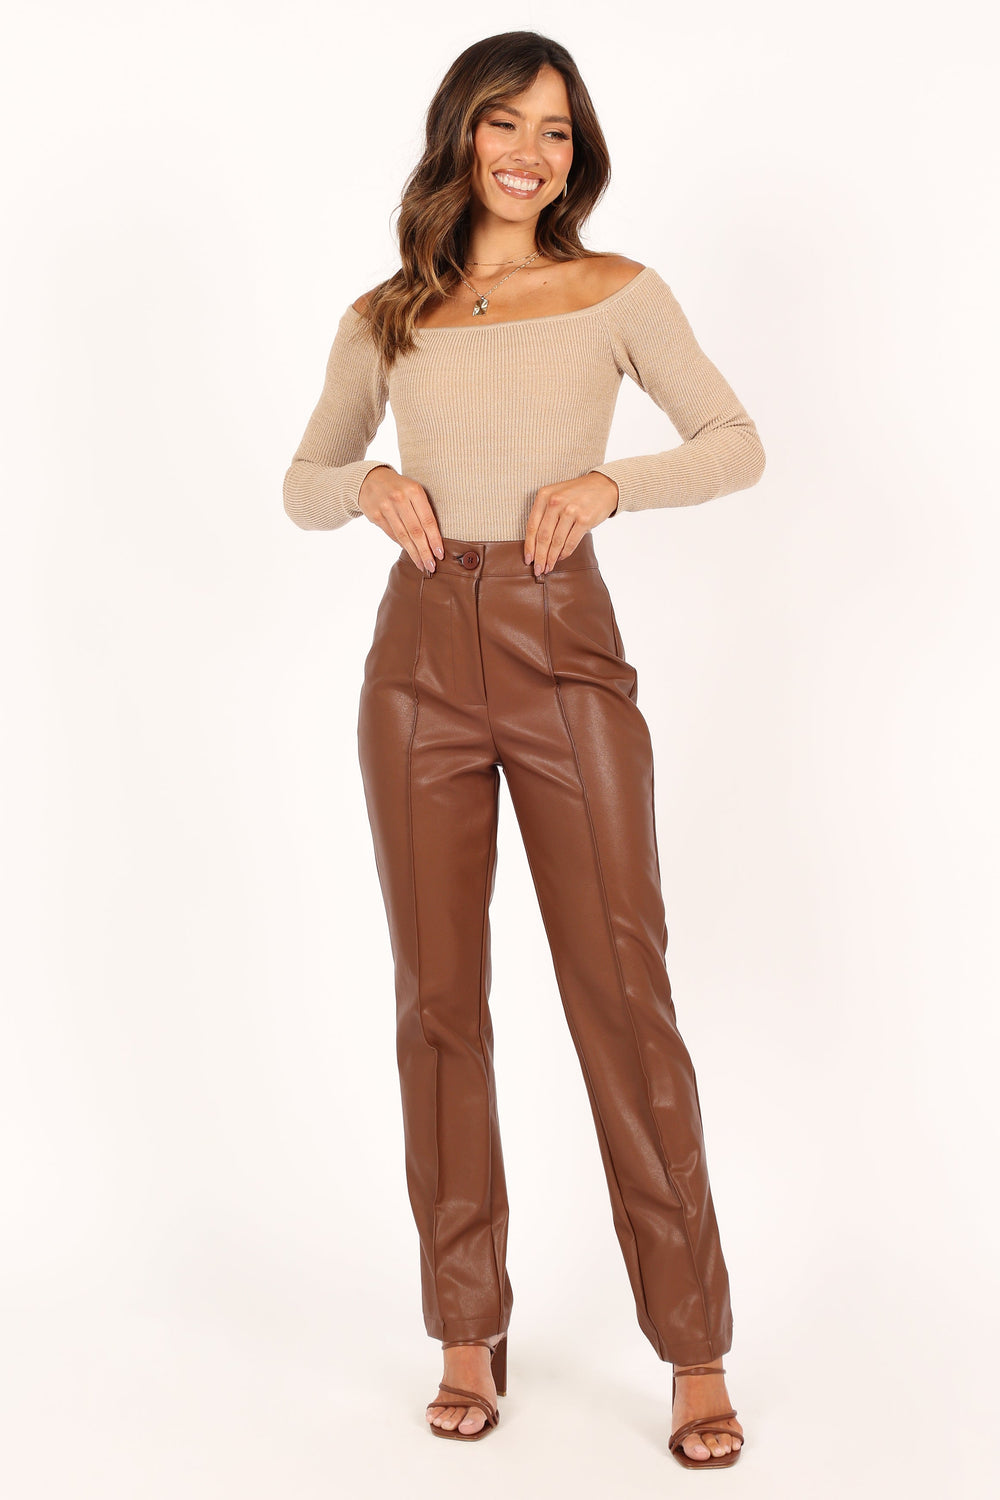 Tagoo Faux Leather Pants for Women High Waisted Pleather Joggers Straight  Leg Trousers with Pockets Brown at Amazon Women's Clothing store